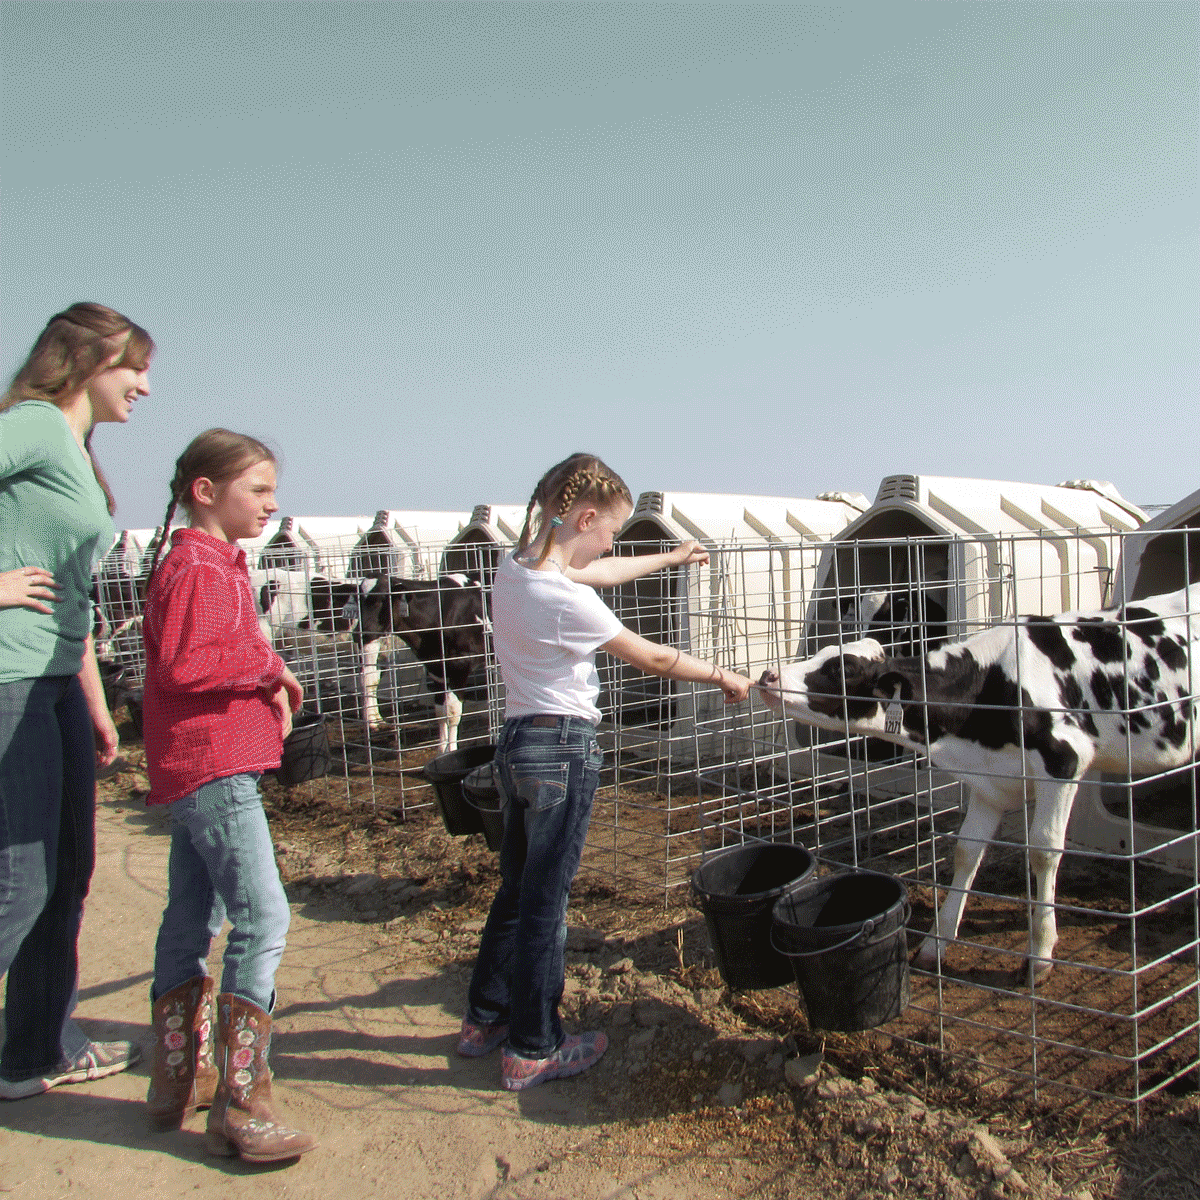 two girls and a woman petting a calf